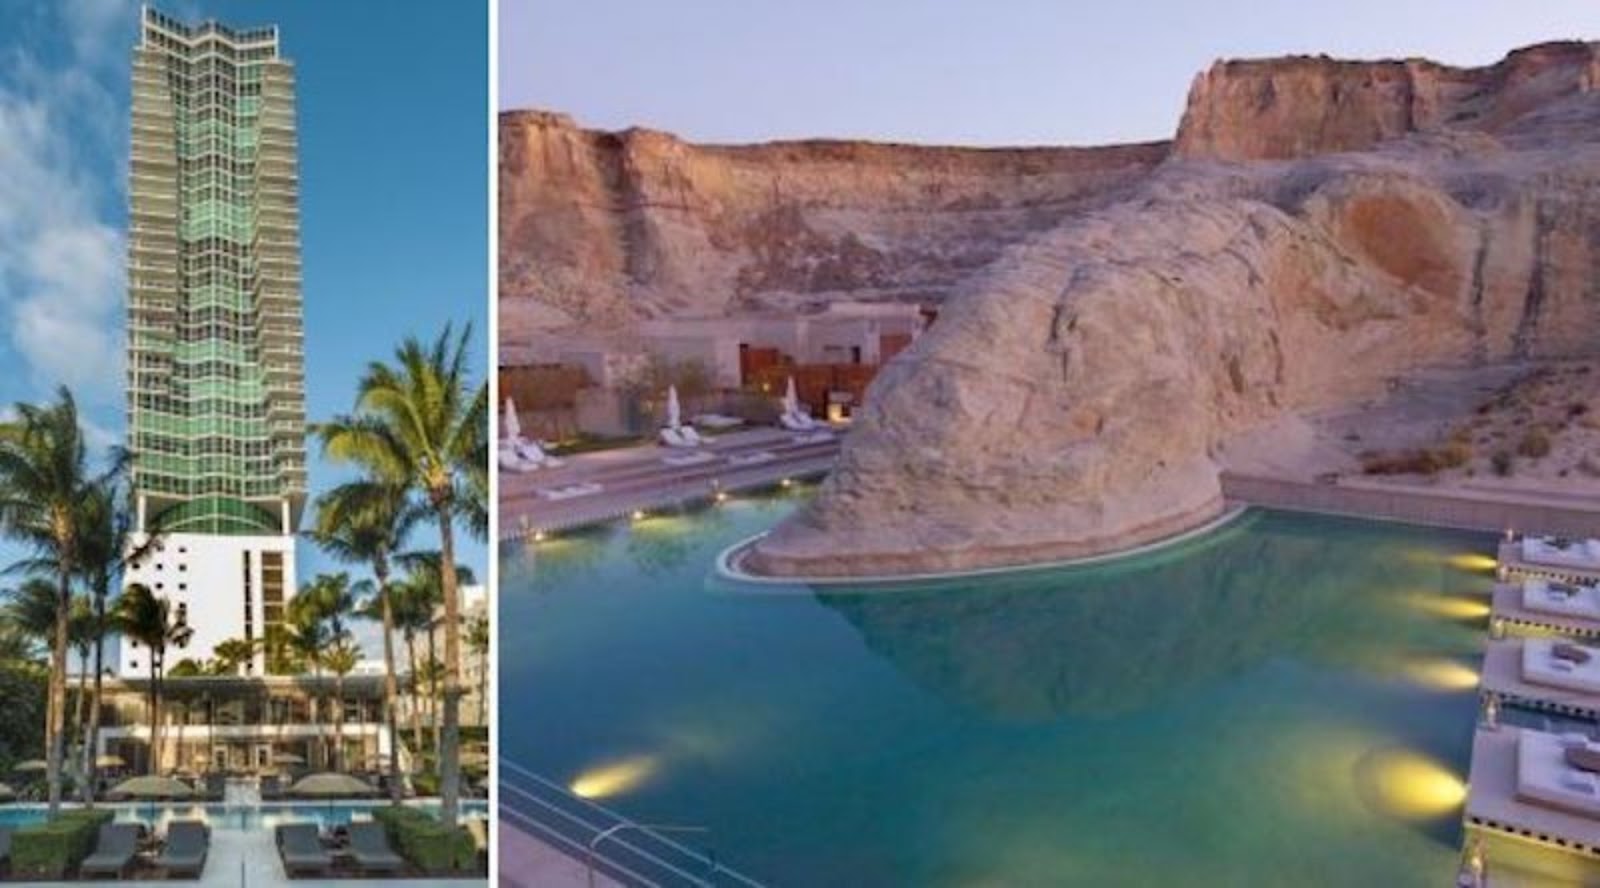 10 Of The Most Beautiful Hotels In America That Deserve A Spot On Your Travel Bucket List